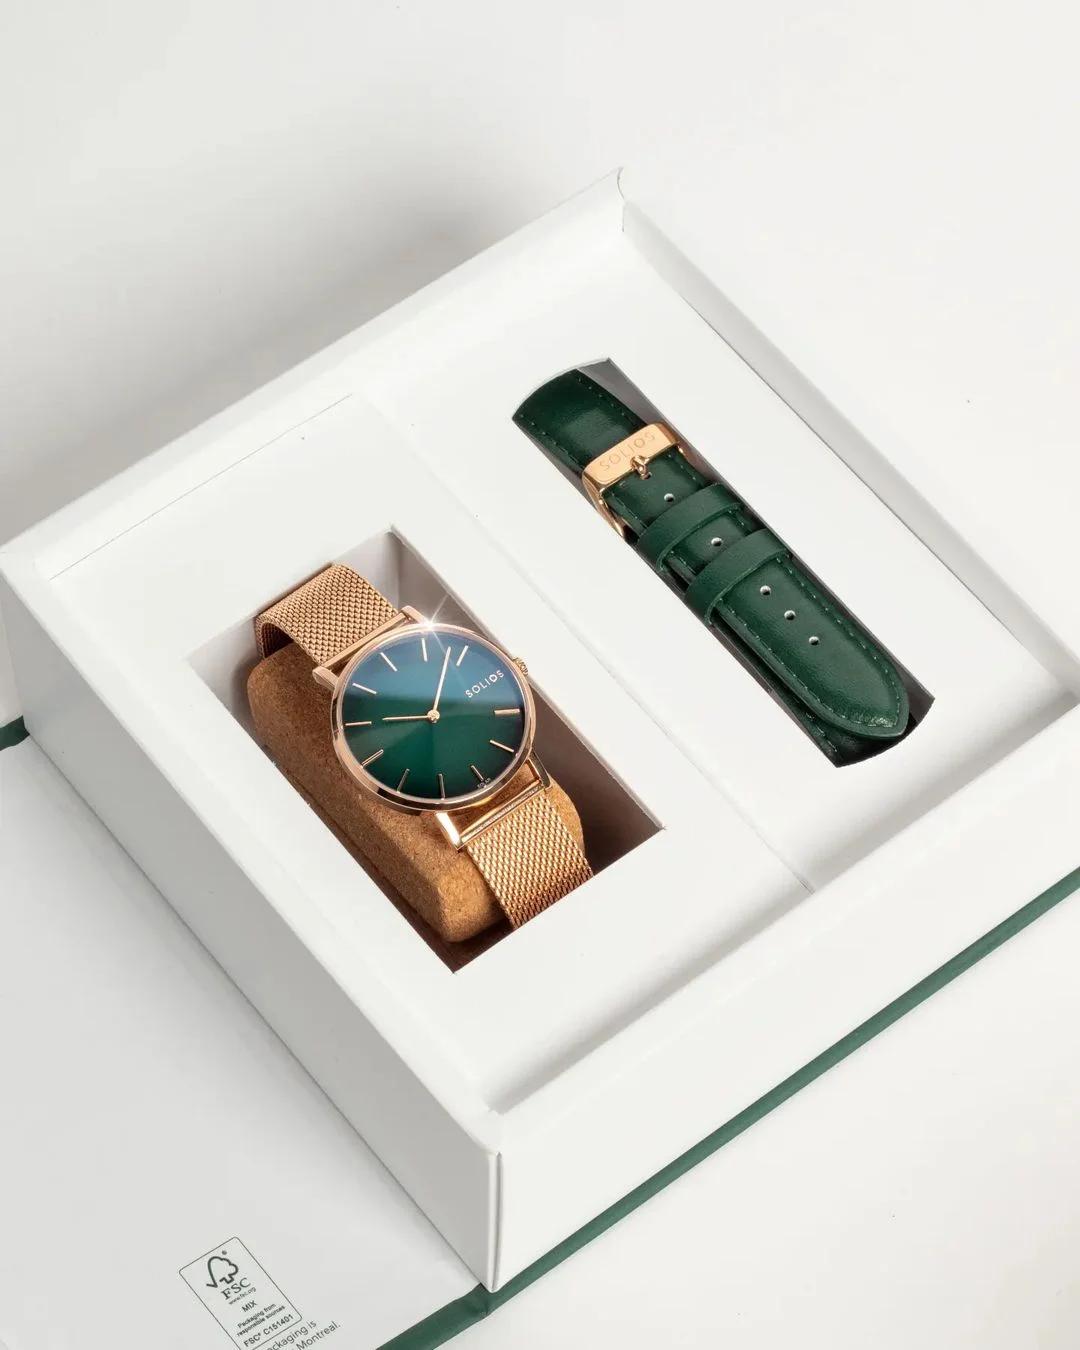 Shop Sustainable and Vegan Women's Watches on Veo